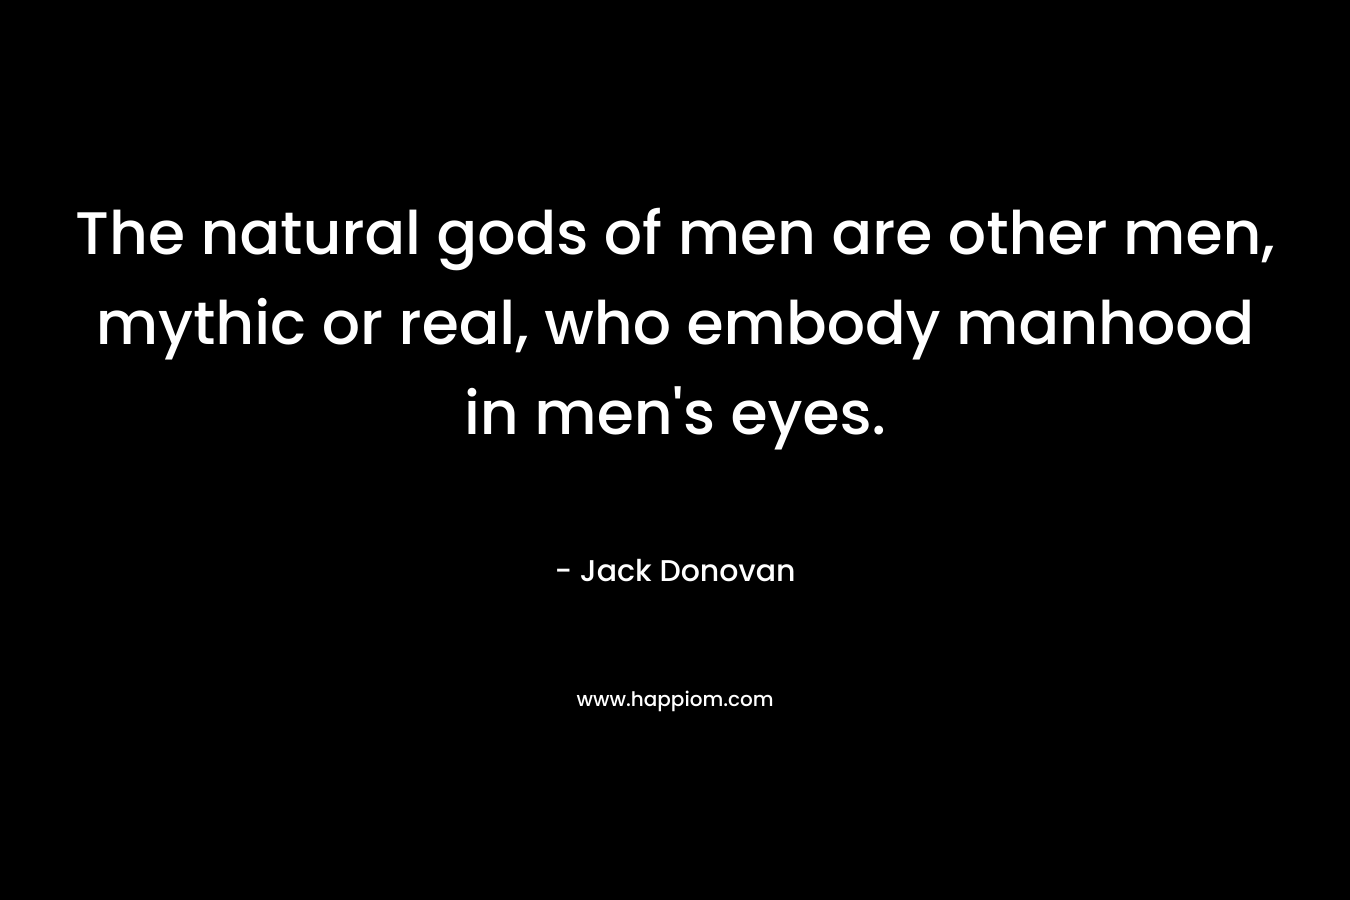 The natural gods of men are other men, mythic or real, who embody manhood in men's eyes.